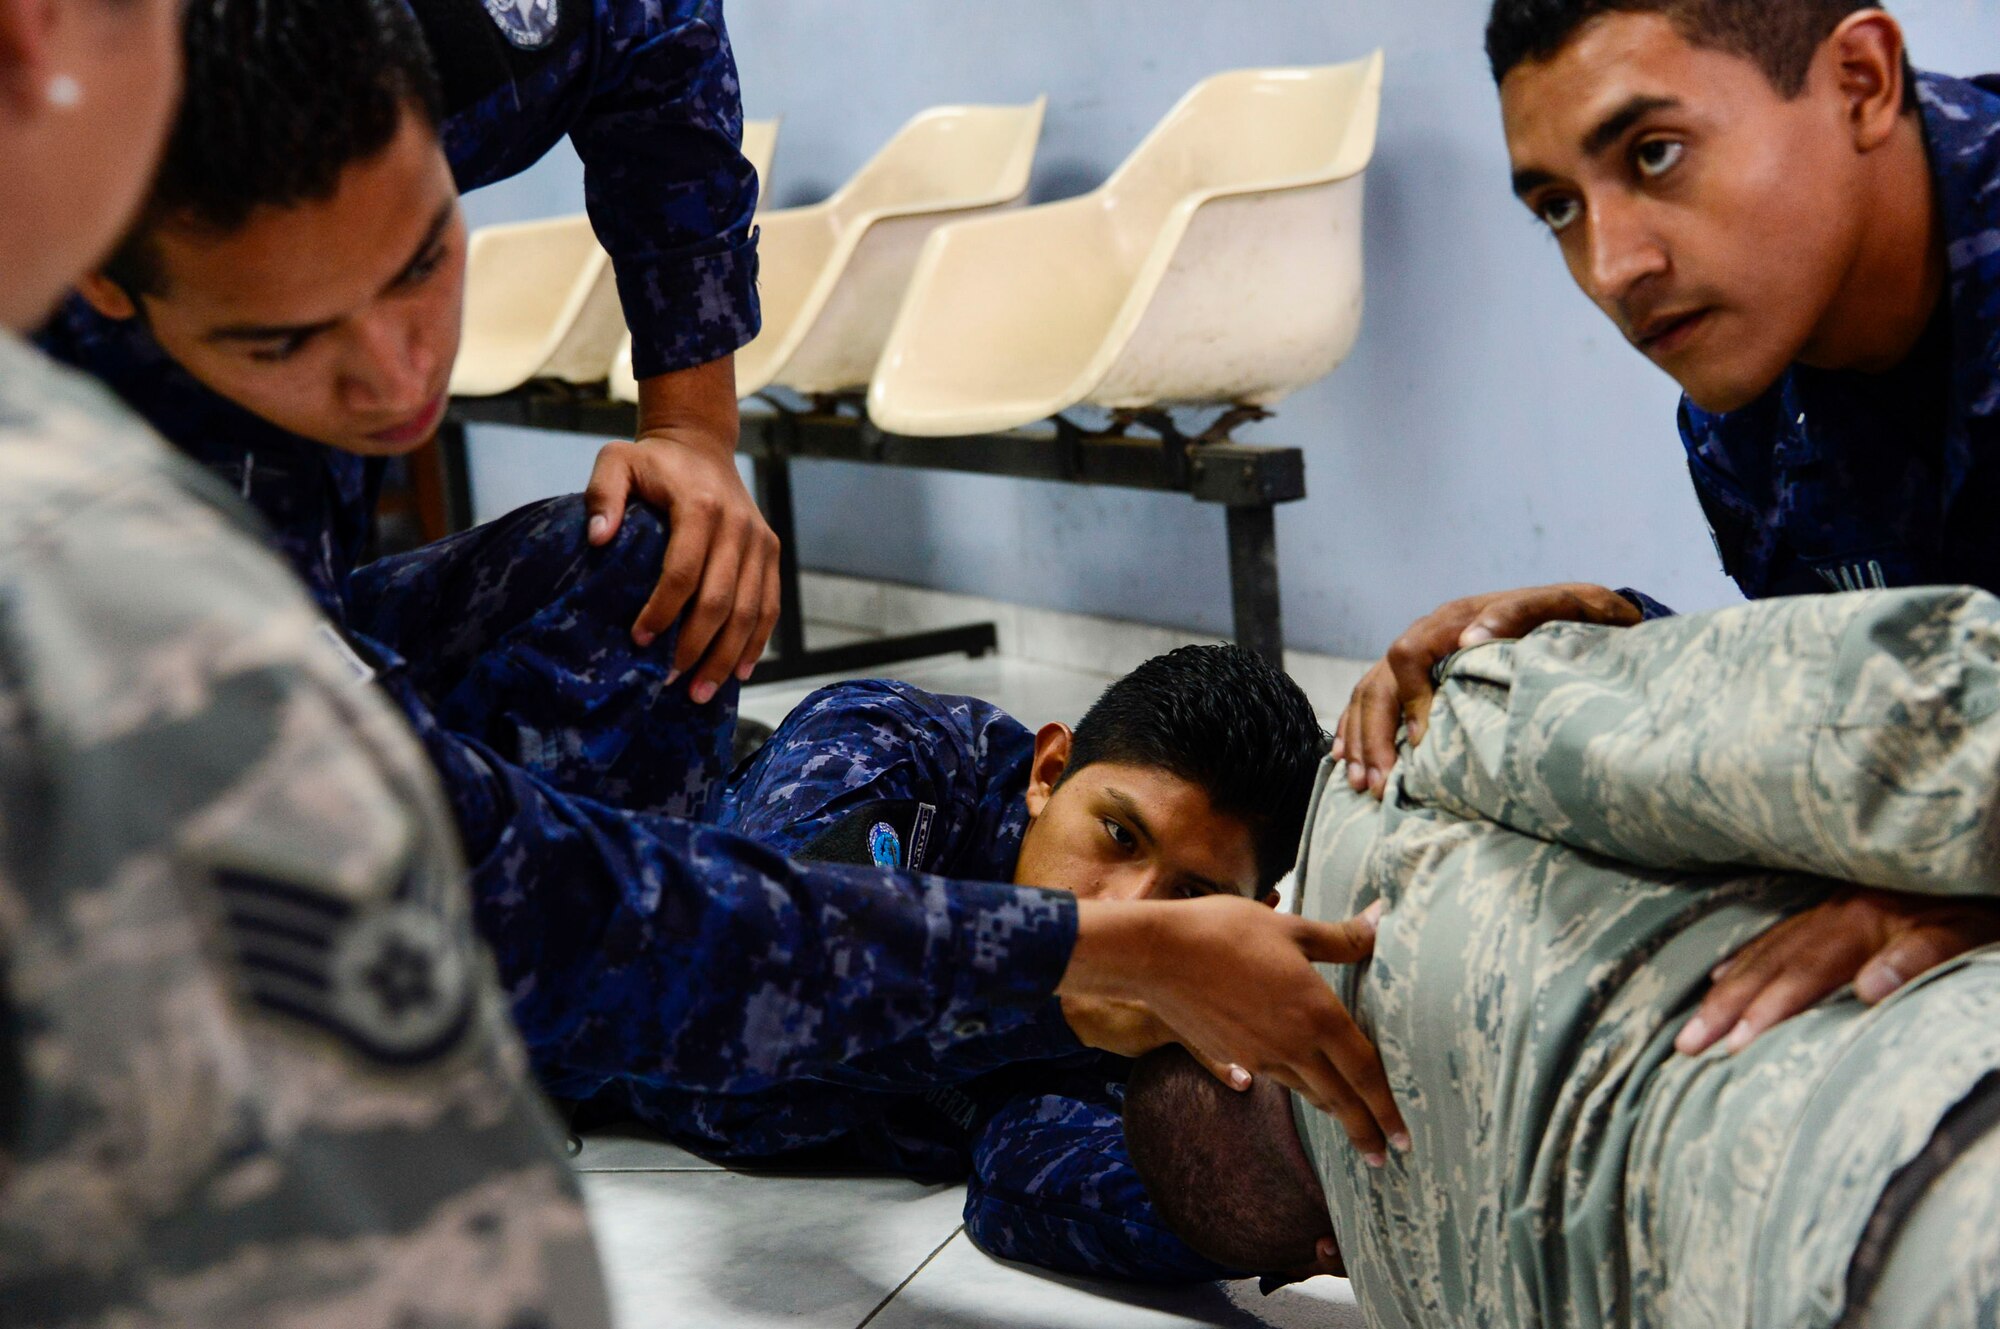 U.S. Air Force Staff Sgt. Karina Cortes and Senior Airman Jacob Radford, 628th Medical Operations Squadron medical technicians, take a group of Salvadoran air force members through self-aid buddy care exercises during a medical subject matter expert exchange at Ilopango Air Base, El Salvador, March 9, 2016. 12th Air Force (Air Forces Southern) surgeon general’s office, led a five-member team of medics from around the U.S. Air Force on a week-long medical subject matter expert exchange in El Salvador. (U.S. Air Force photo by Tech. Sgt. Heather R. Redman/Released)